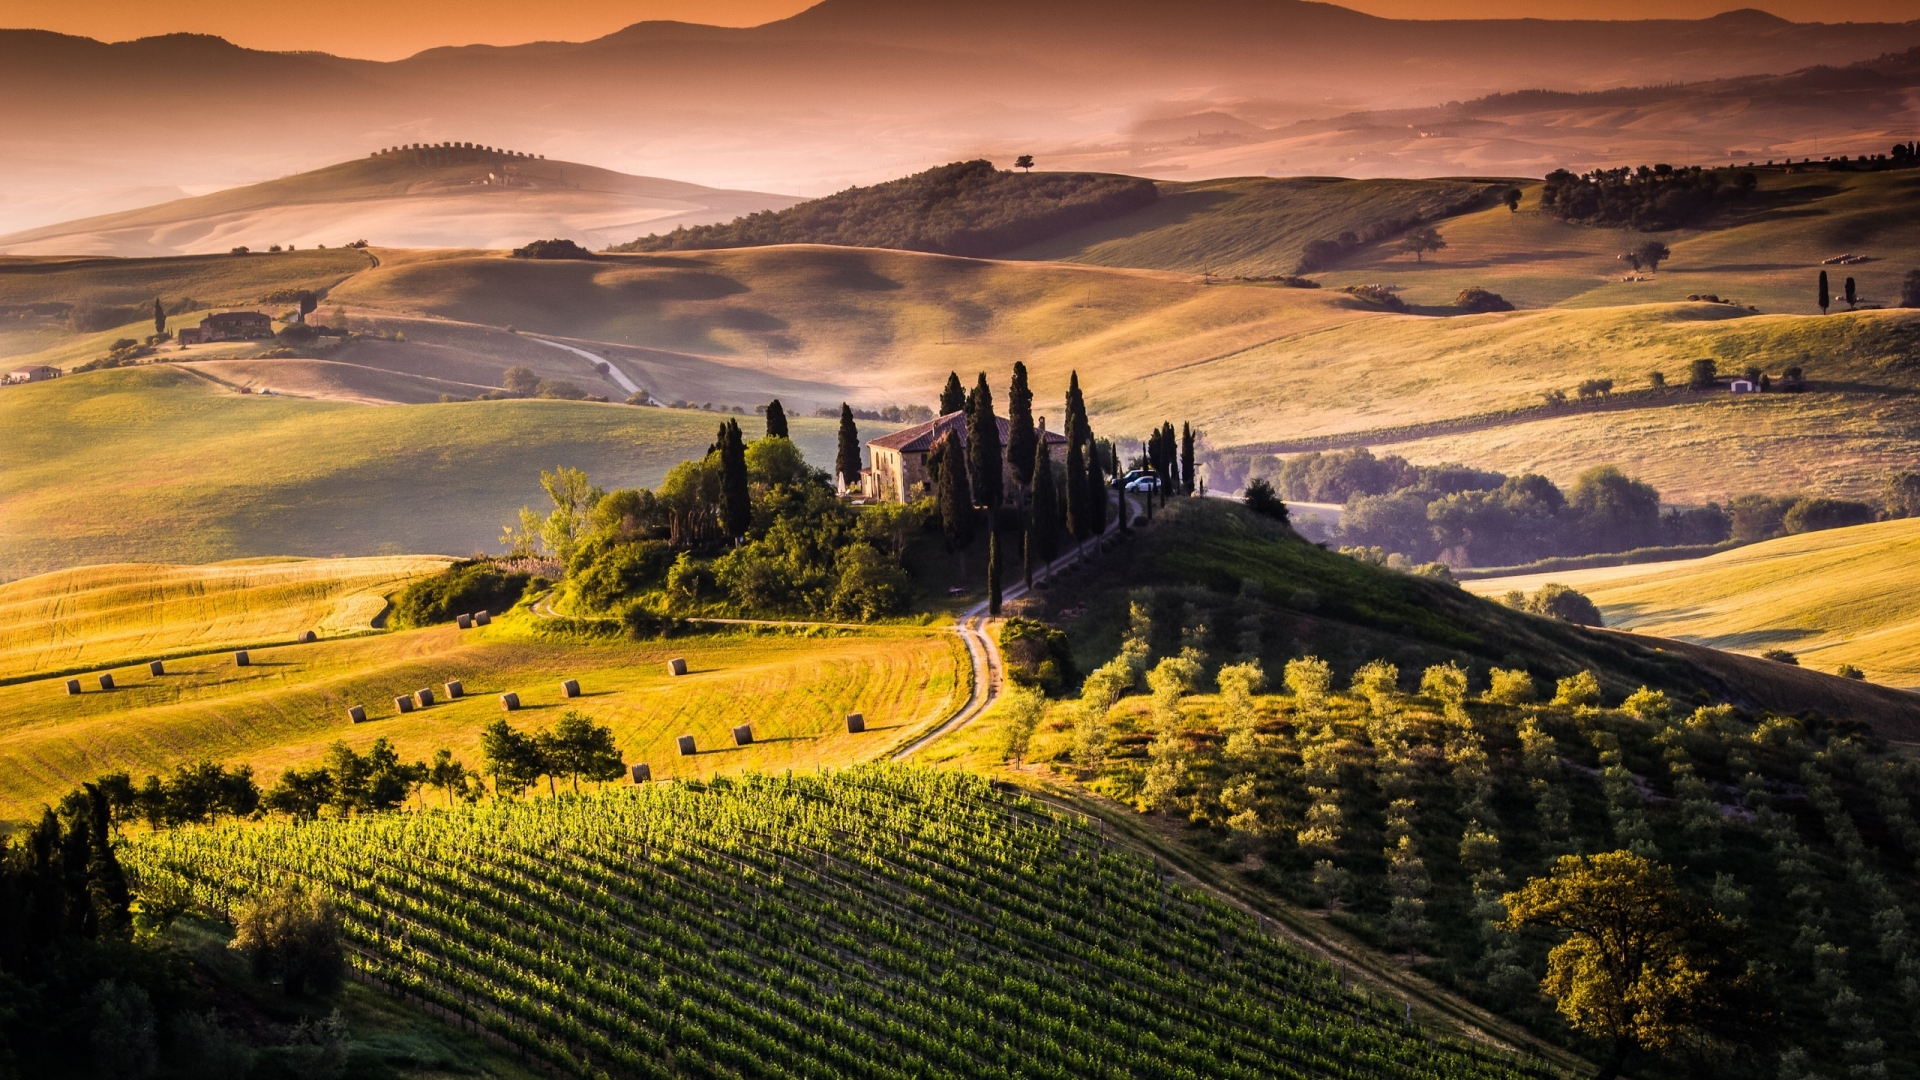 Amazing Tuscany View for 1920 x 1080 HDTV 1080p resolution